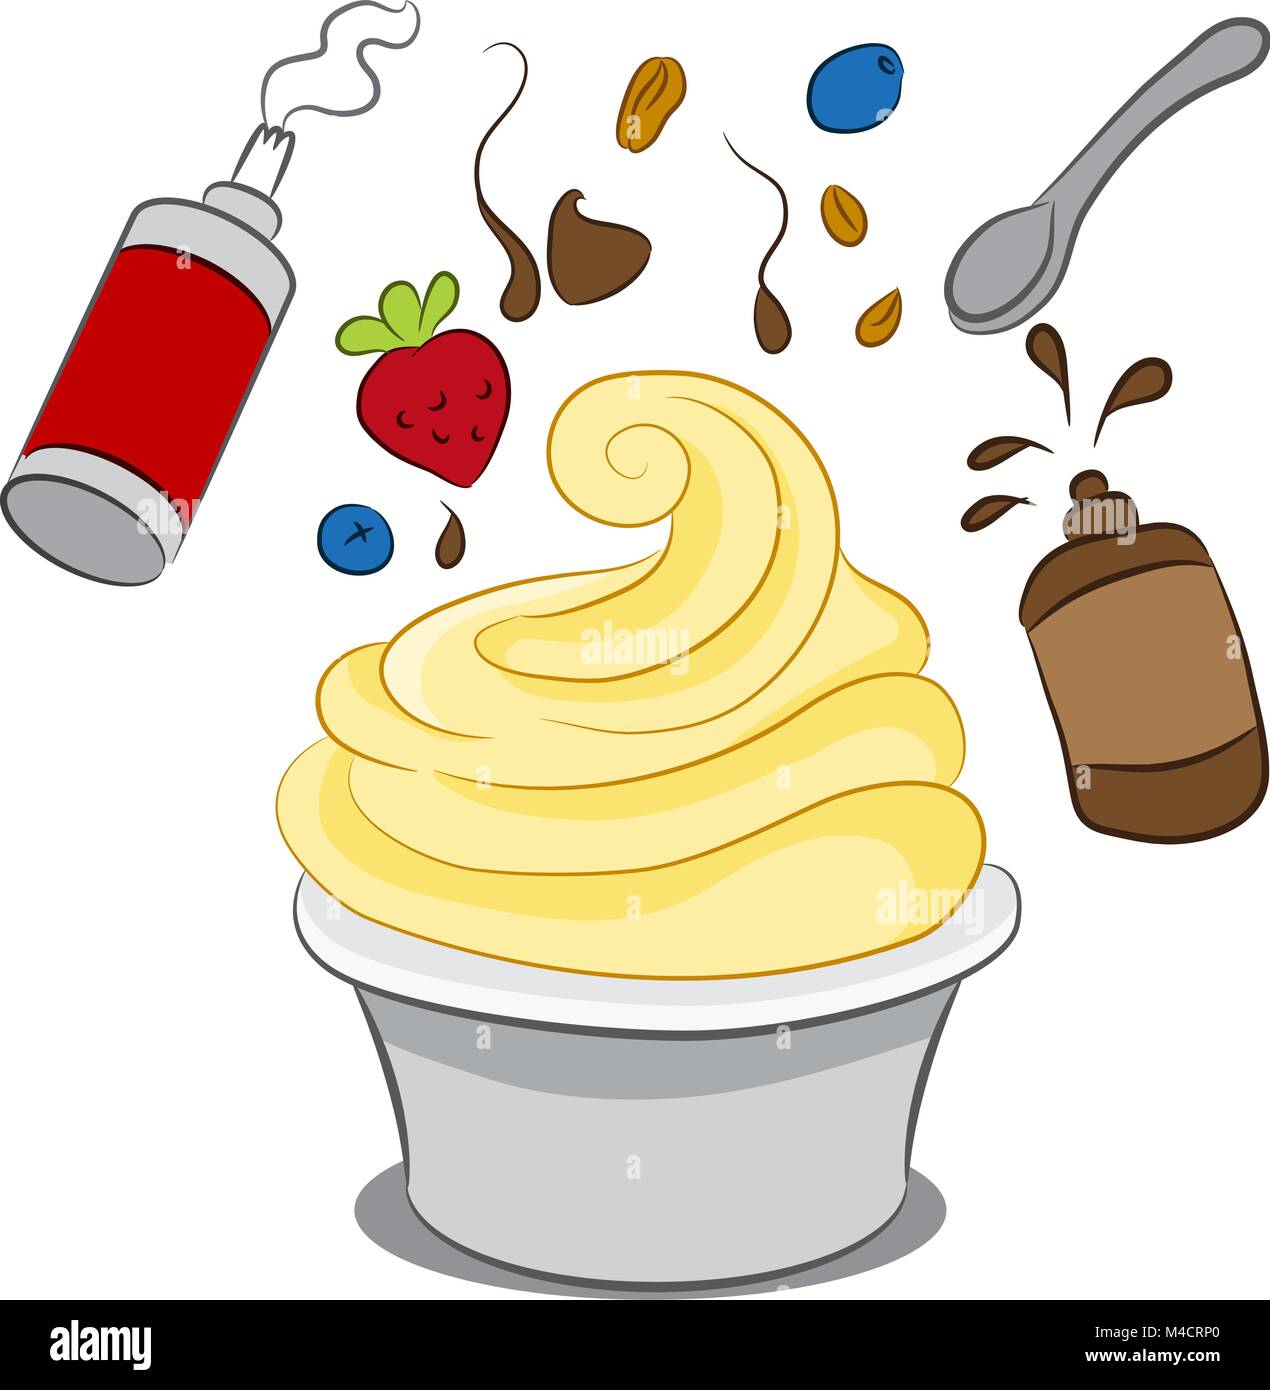 An image of a cup of frozen yogurt with condiments. Stock Vector